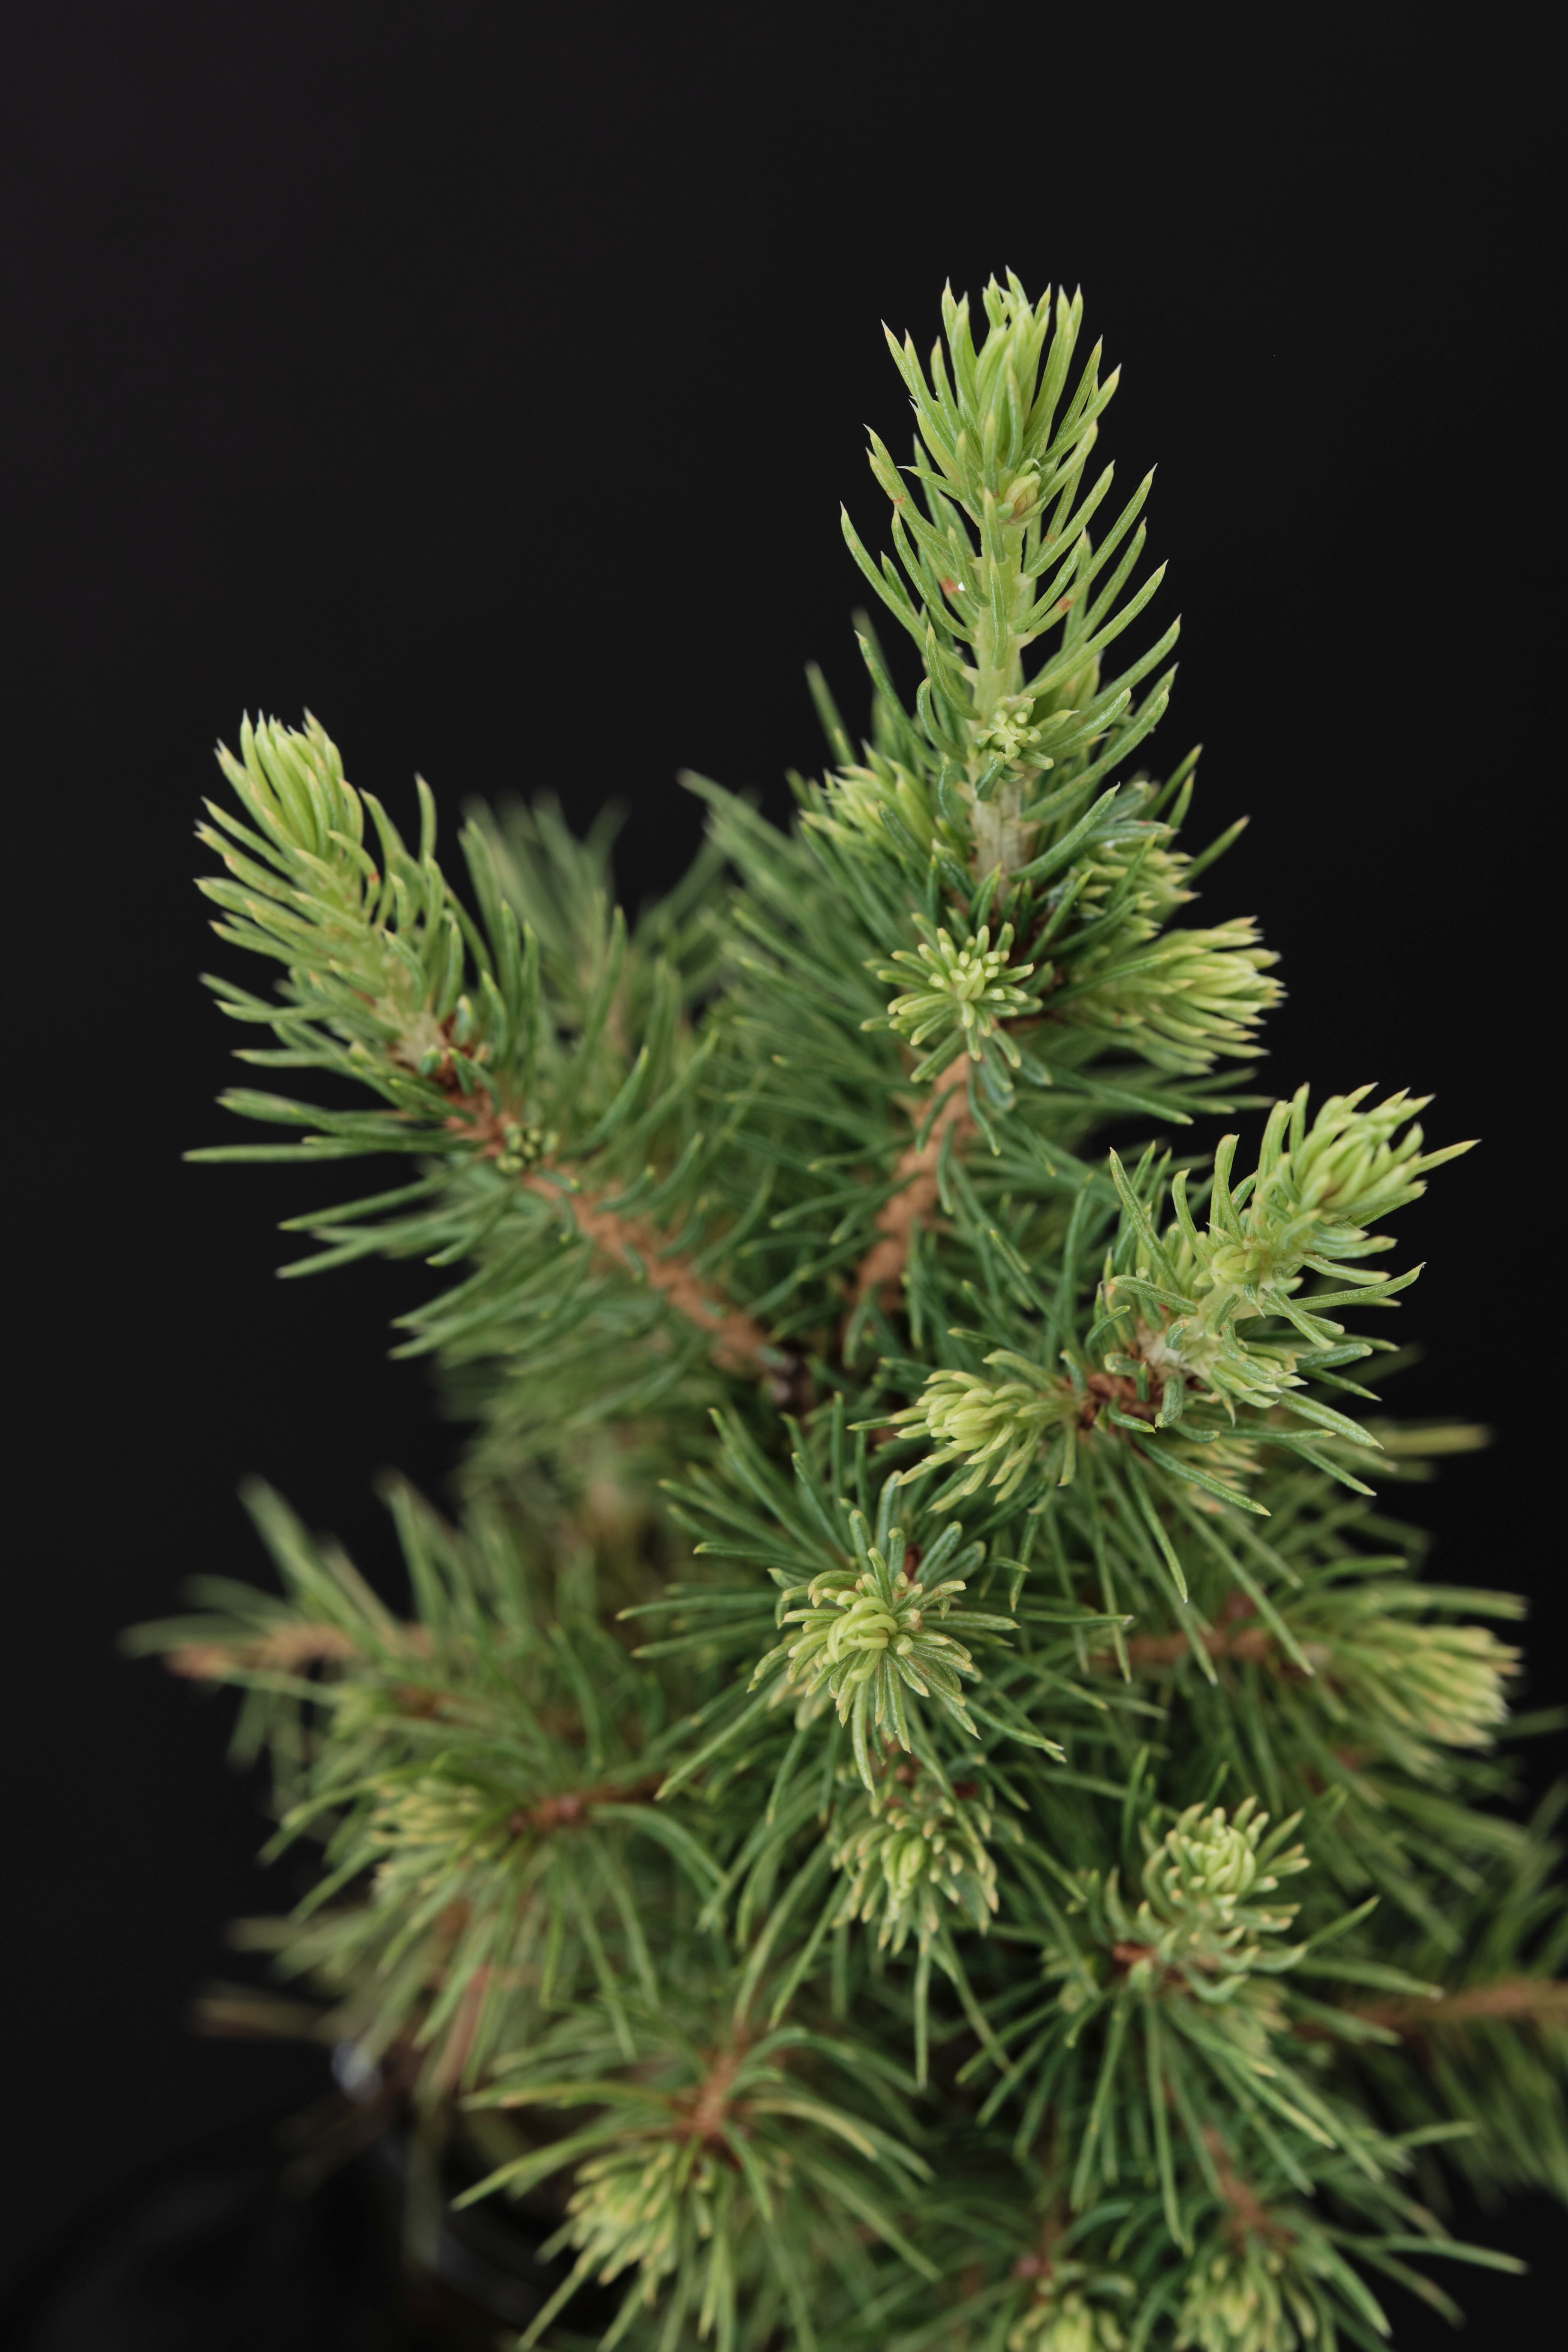 images/plants/picea/pic-spruce-it-up/pic-spruce-it-up-0010.jpg